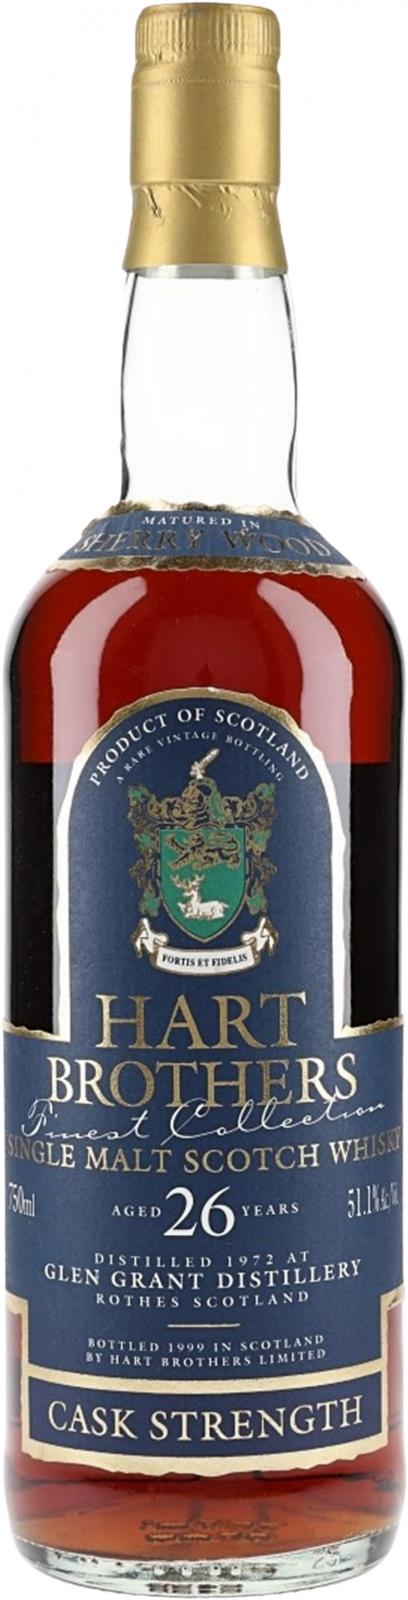 Glen Grant 1972 HB Finest Collection Sherry Wood 51.1% 750ml